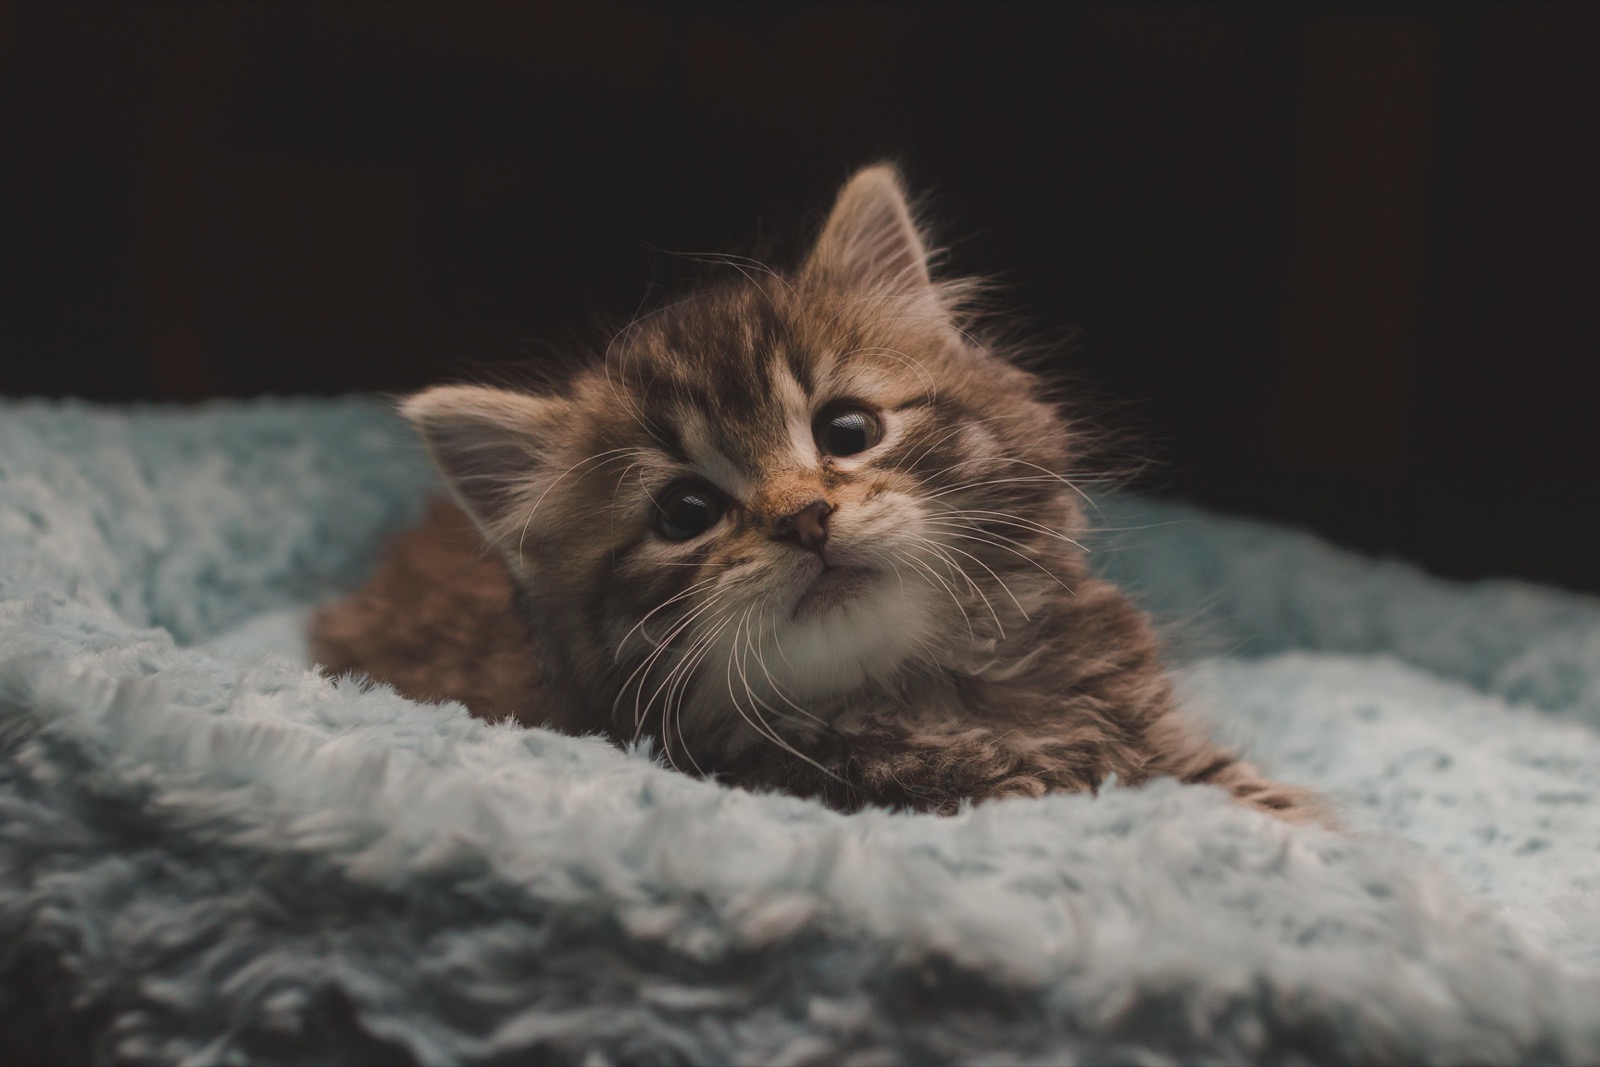 Can You Pass This General Knowledge Quiz While Being Distracted by Adorable Kittens? Cute cat kitten 12